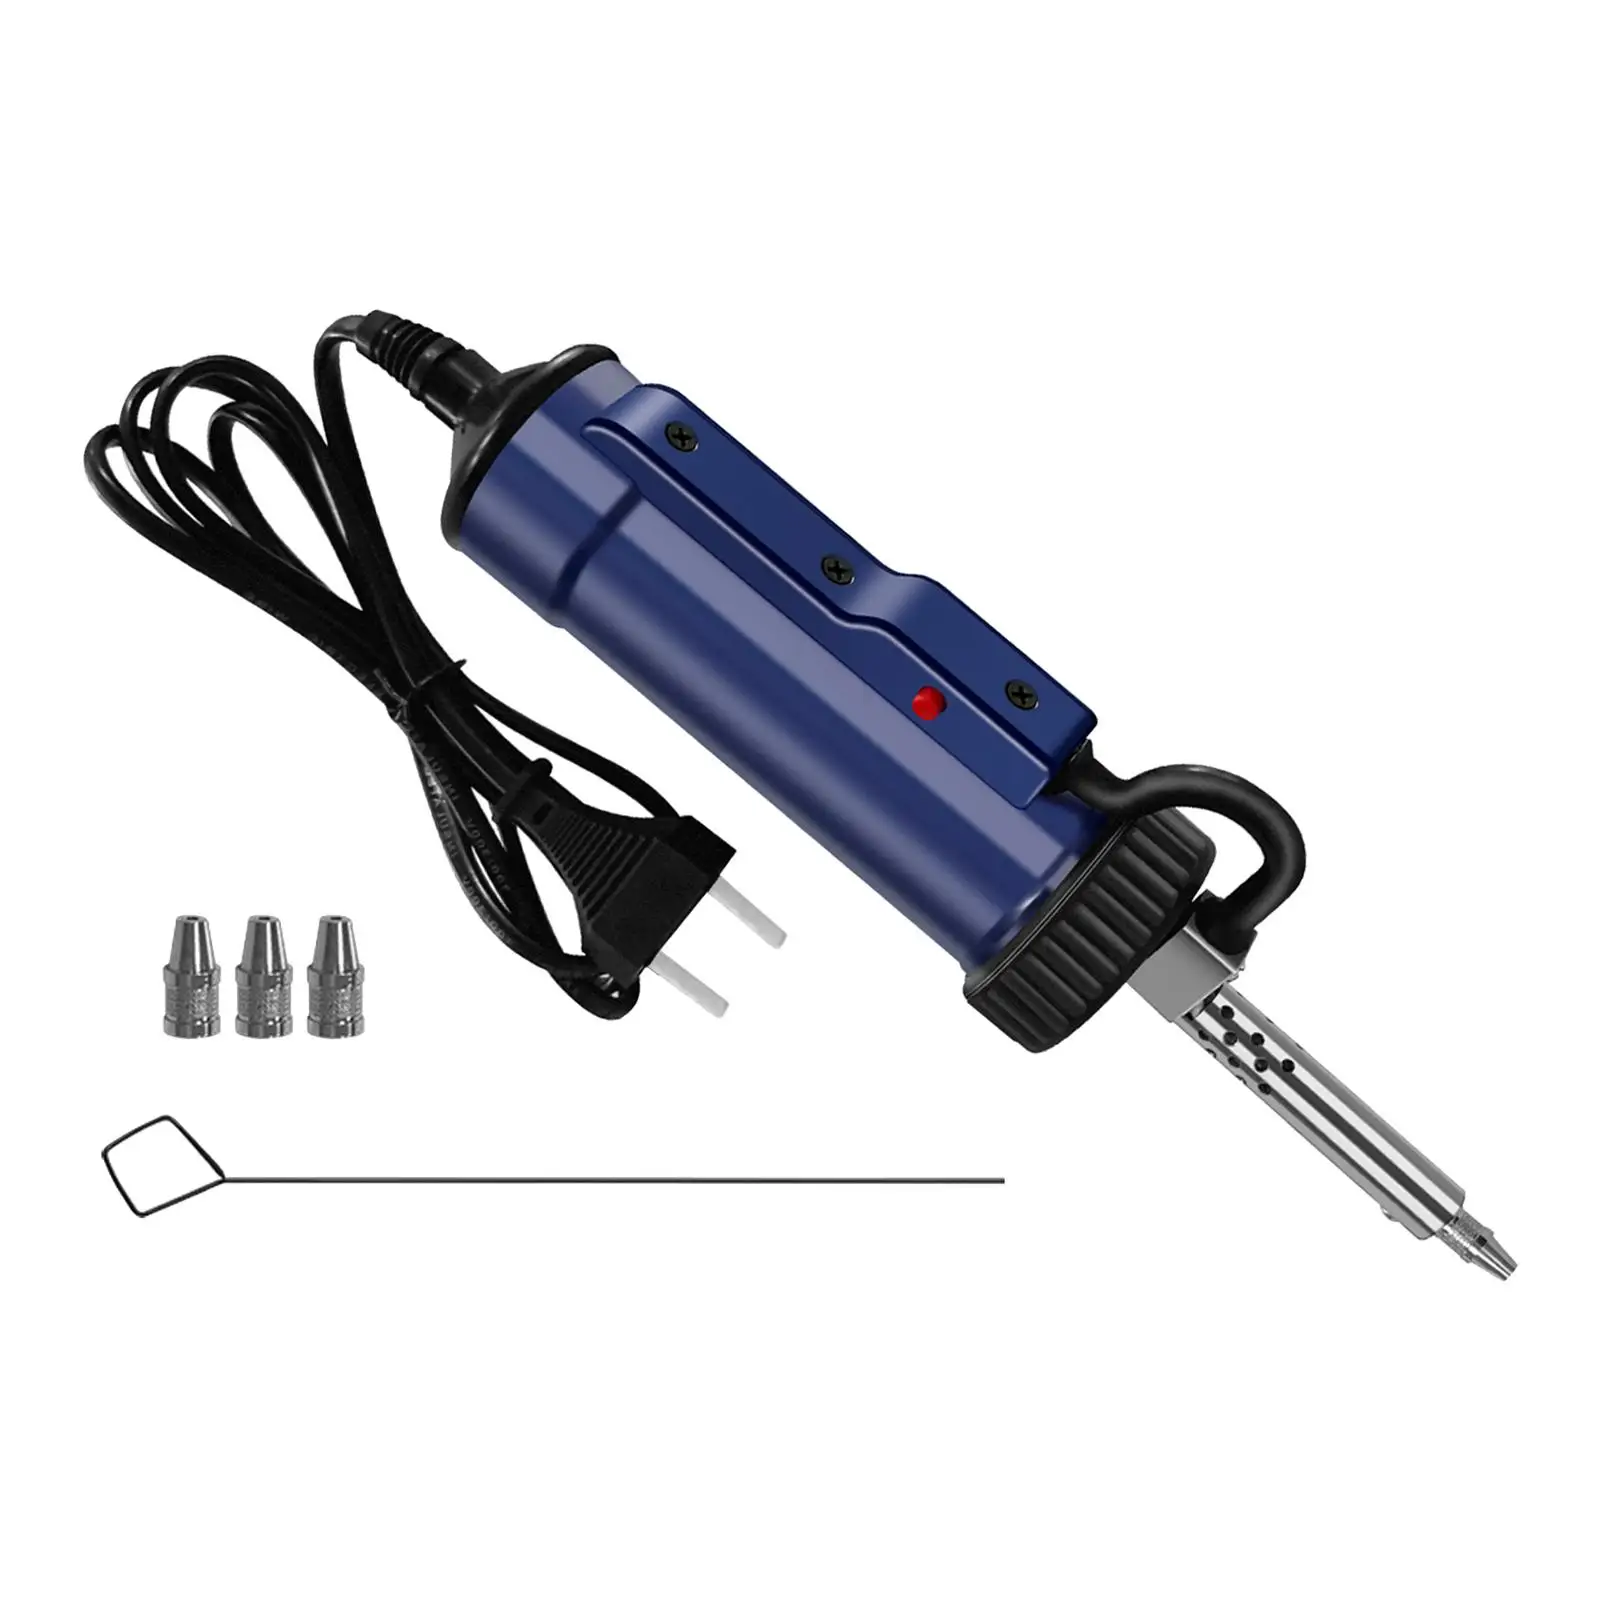 Solder suckers us Adapter 30W Welding Automatic Handheld Solder Iron Kits for Home DIY Hobby Jewelry Industry Circuit Board